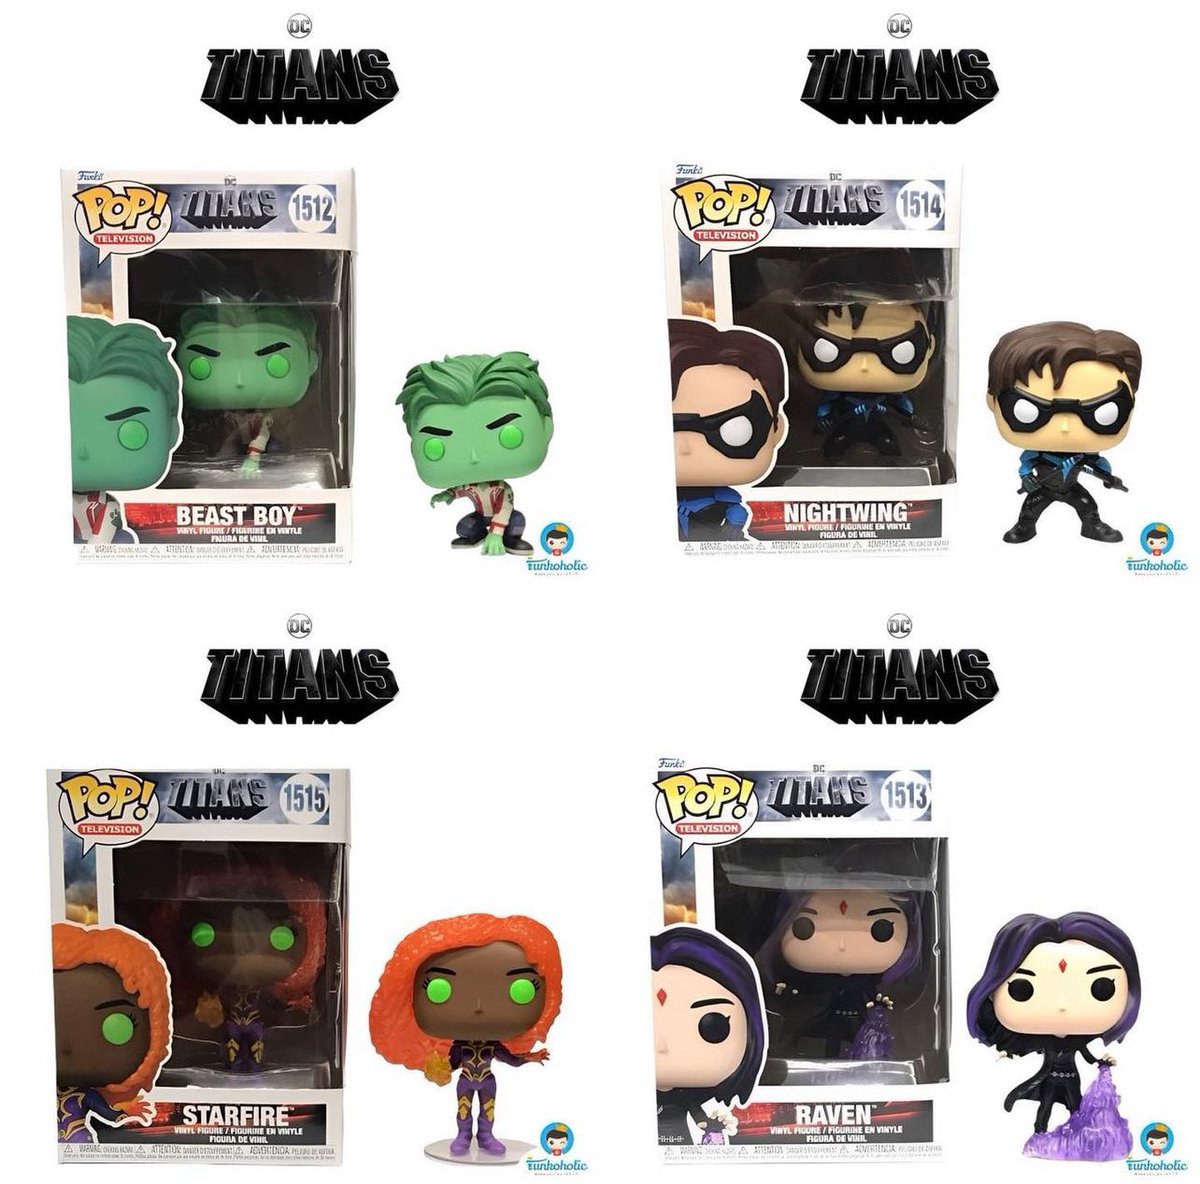 YESSS MY TITANS FAMILY FINALLY GETTING THE FUNKO POPS THEY DESERVE 🙌🏽😭❤️ #DCTitans